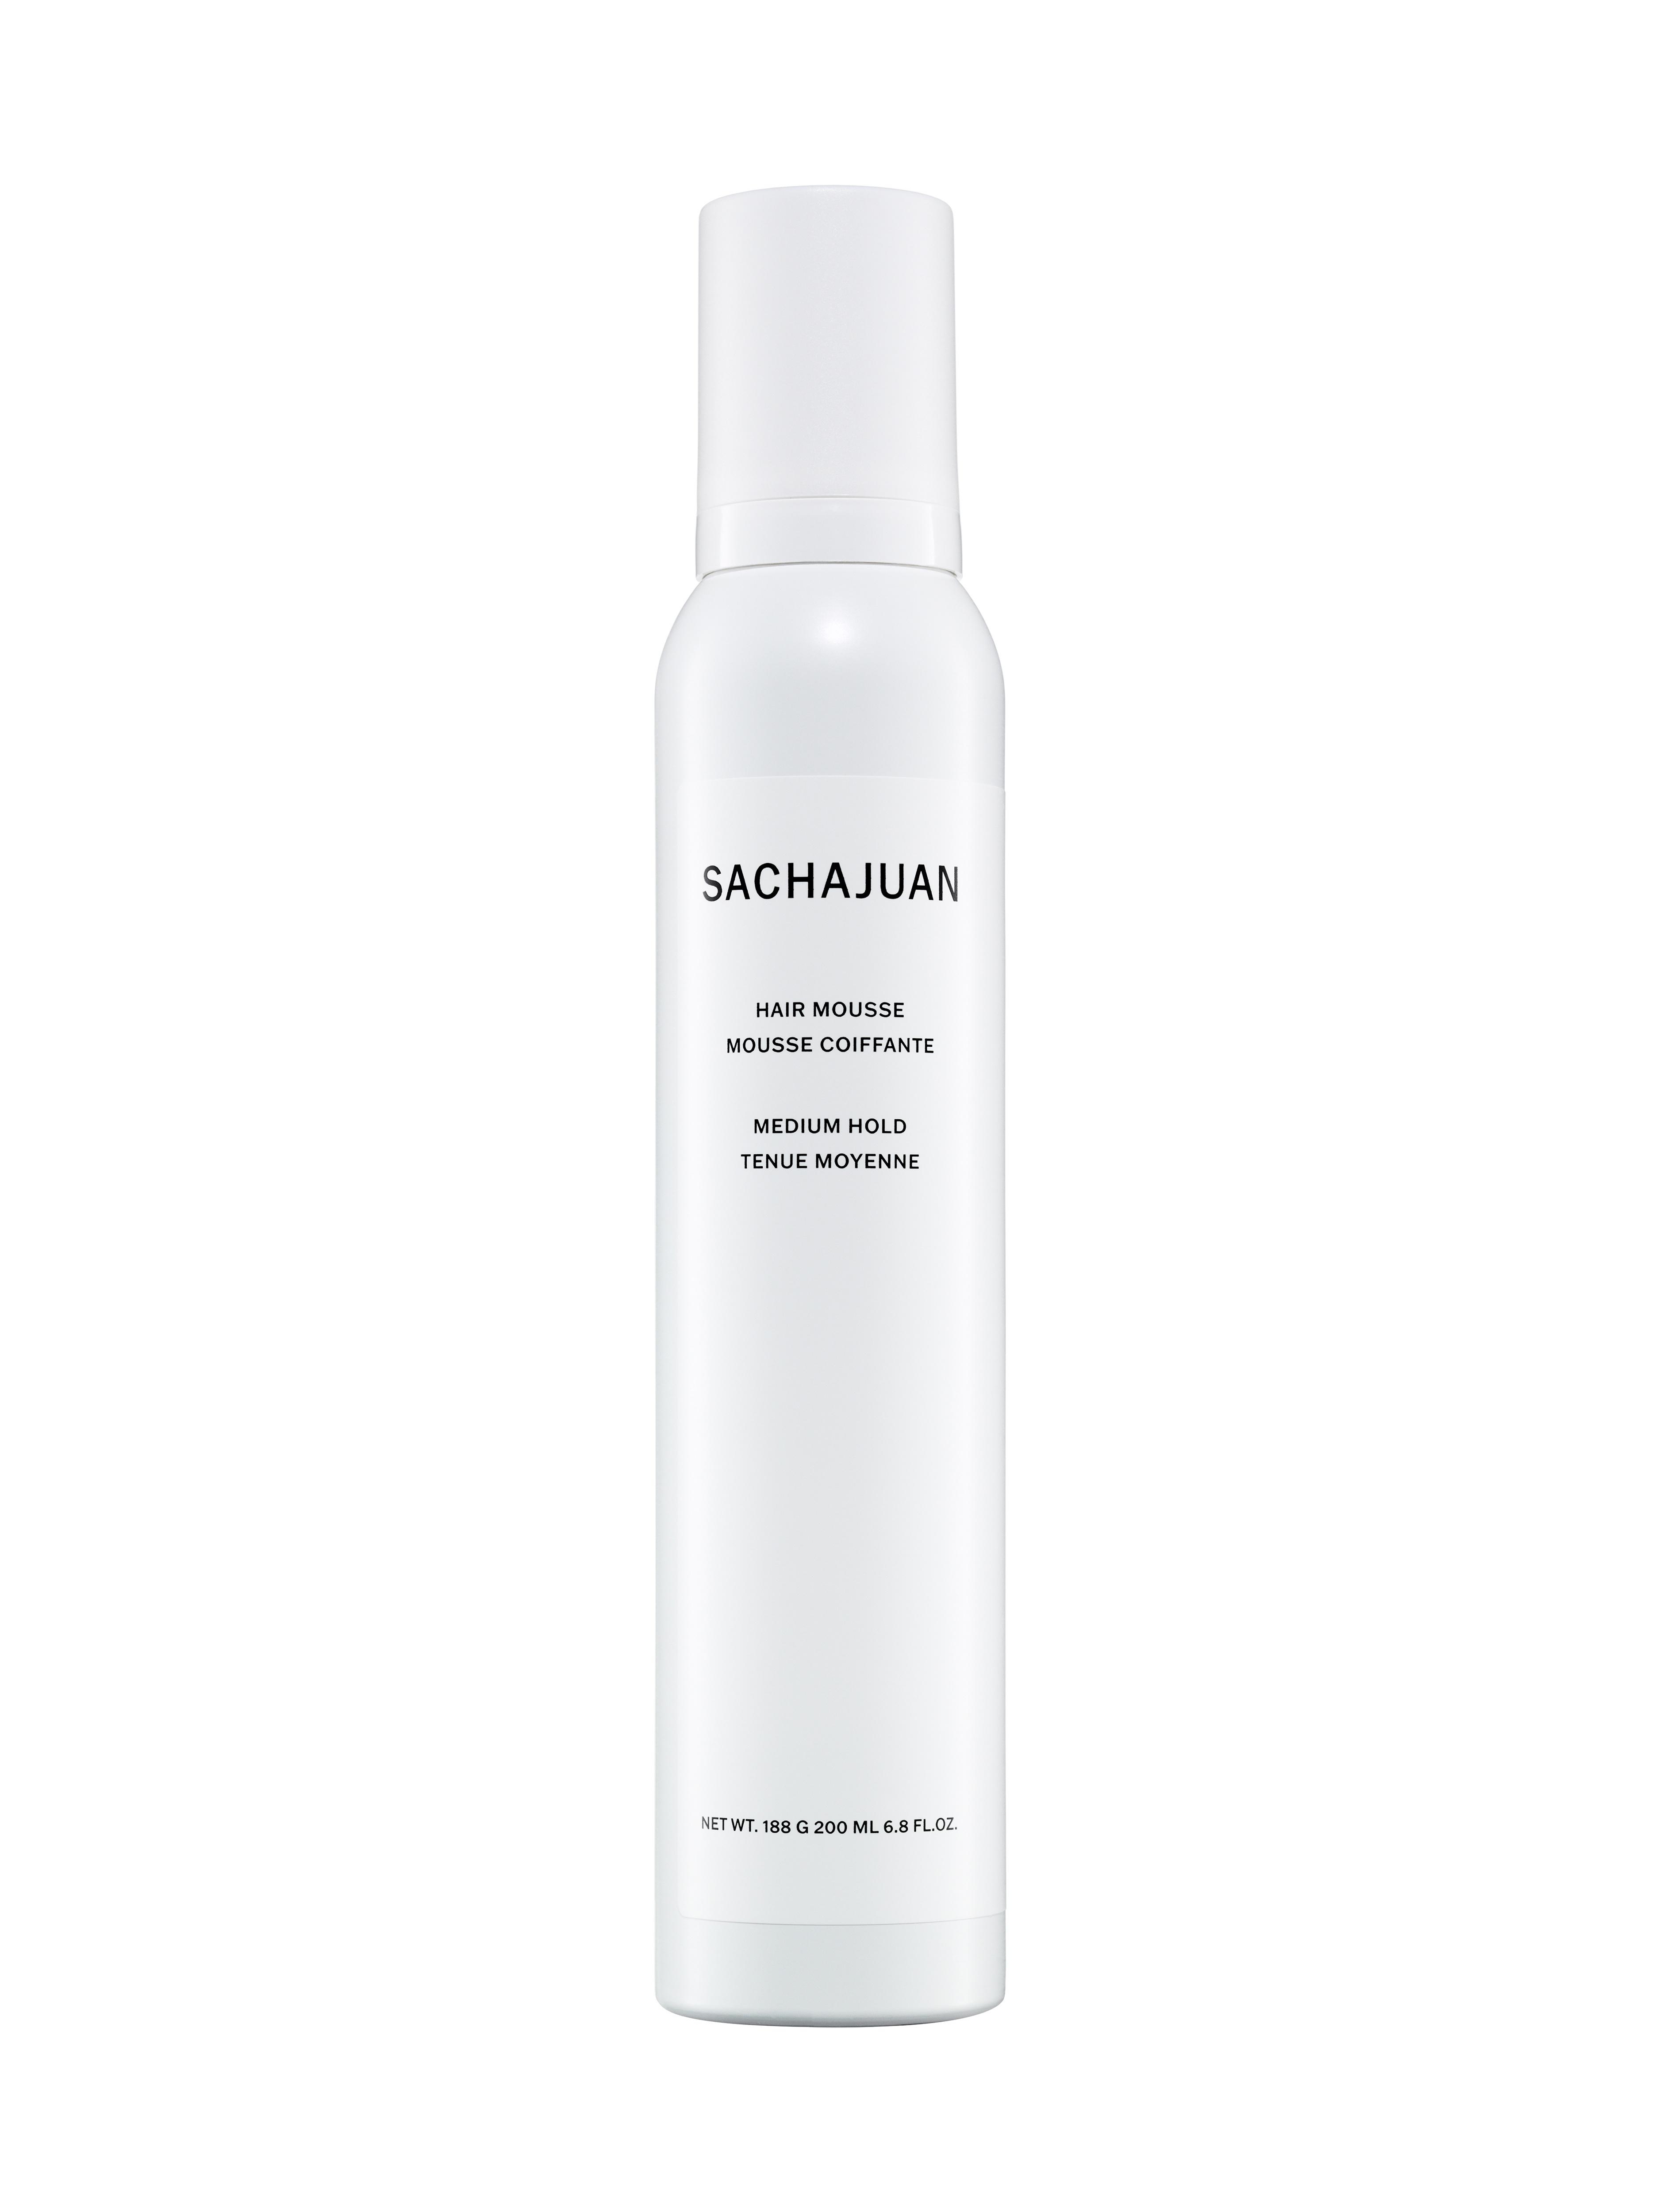 Product image from SACHAJUAN - Hair Mousse Medium Hold